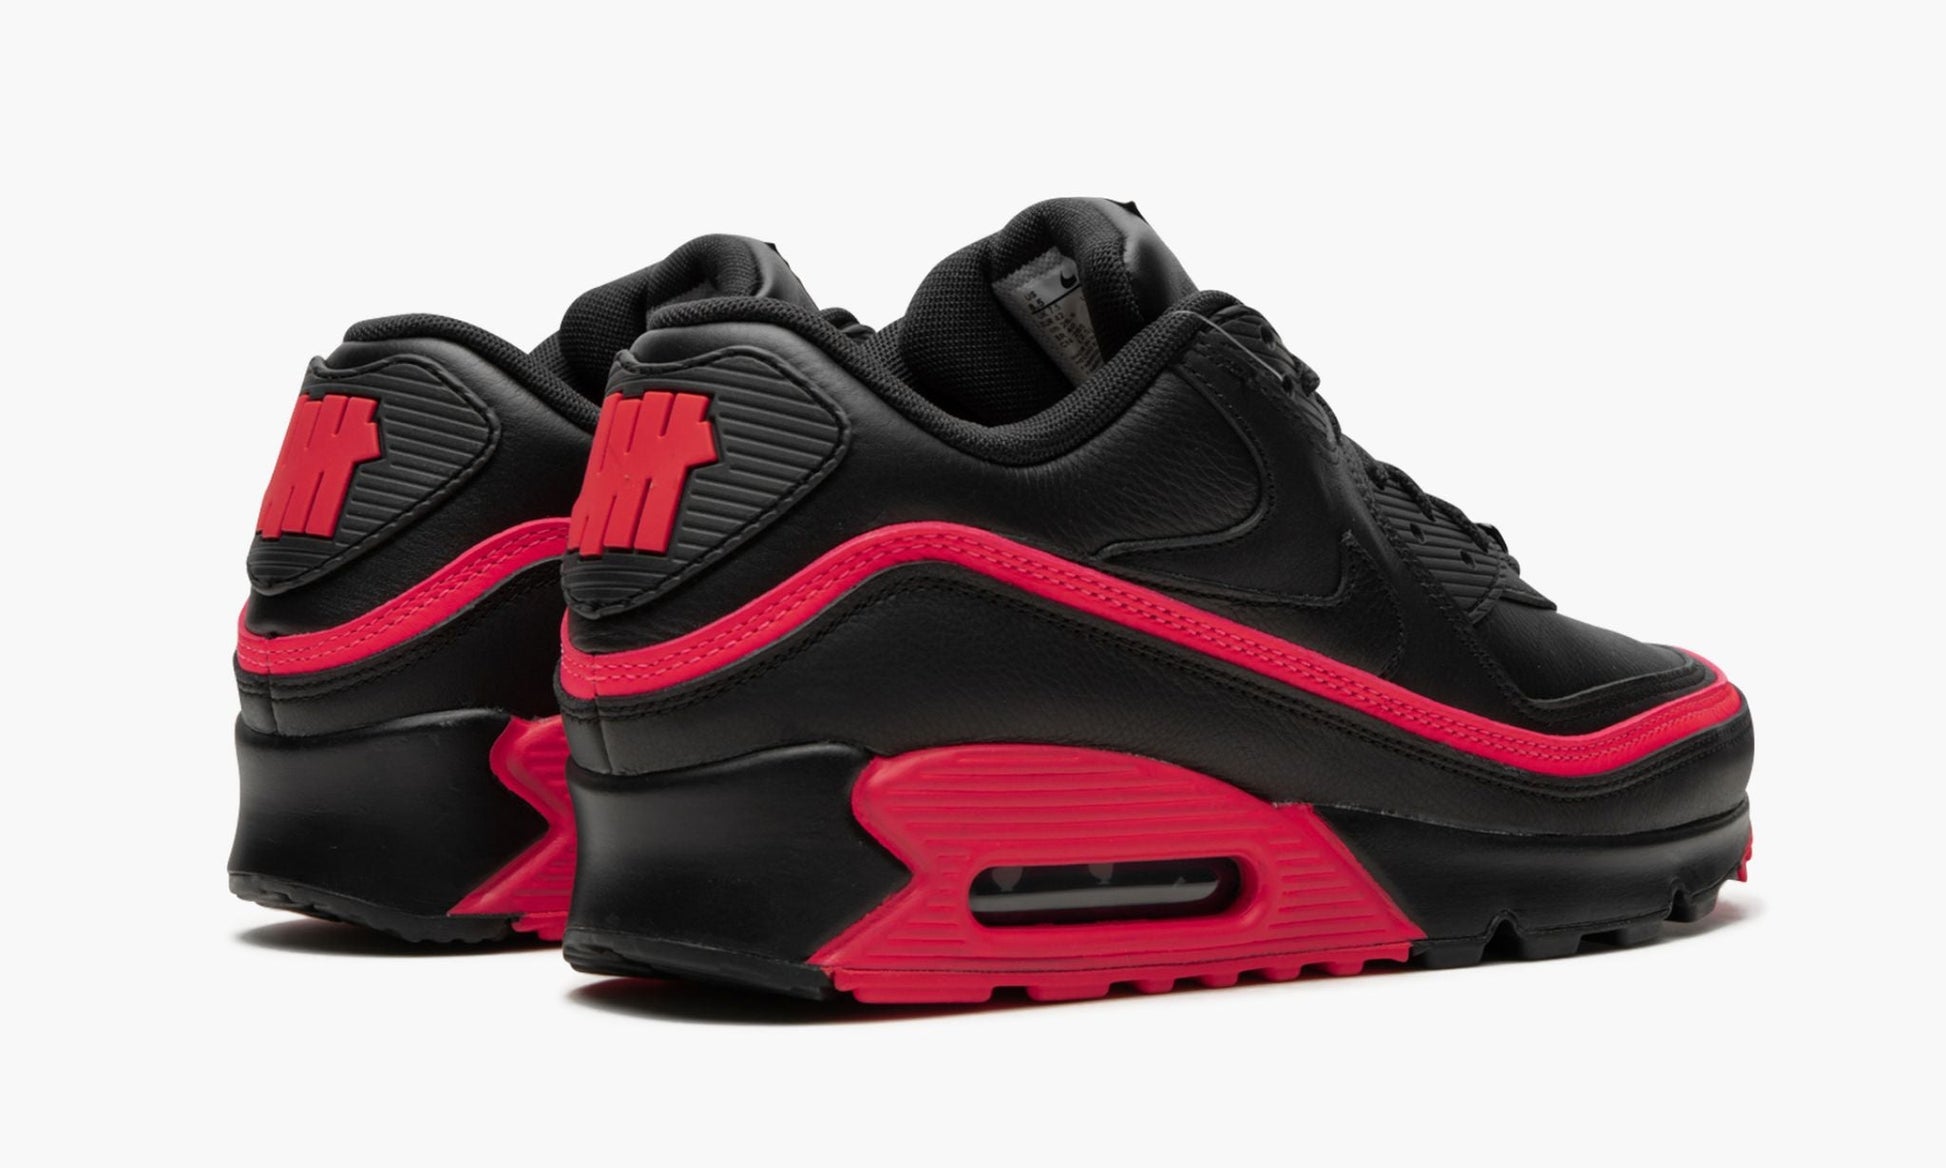 Air Max 90 / UNDFTD "Undefeated Black/Red"